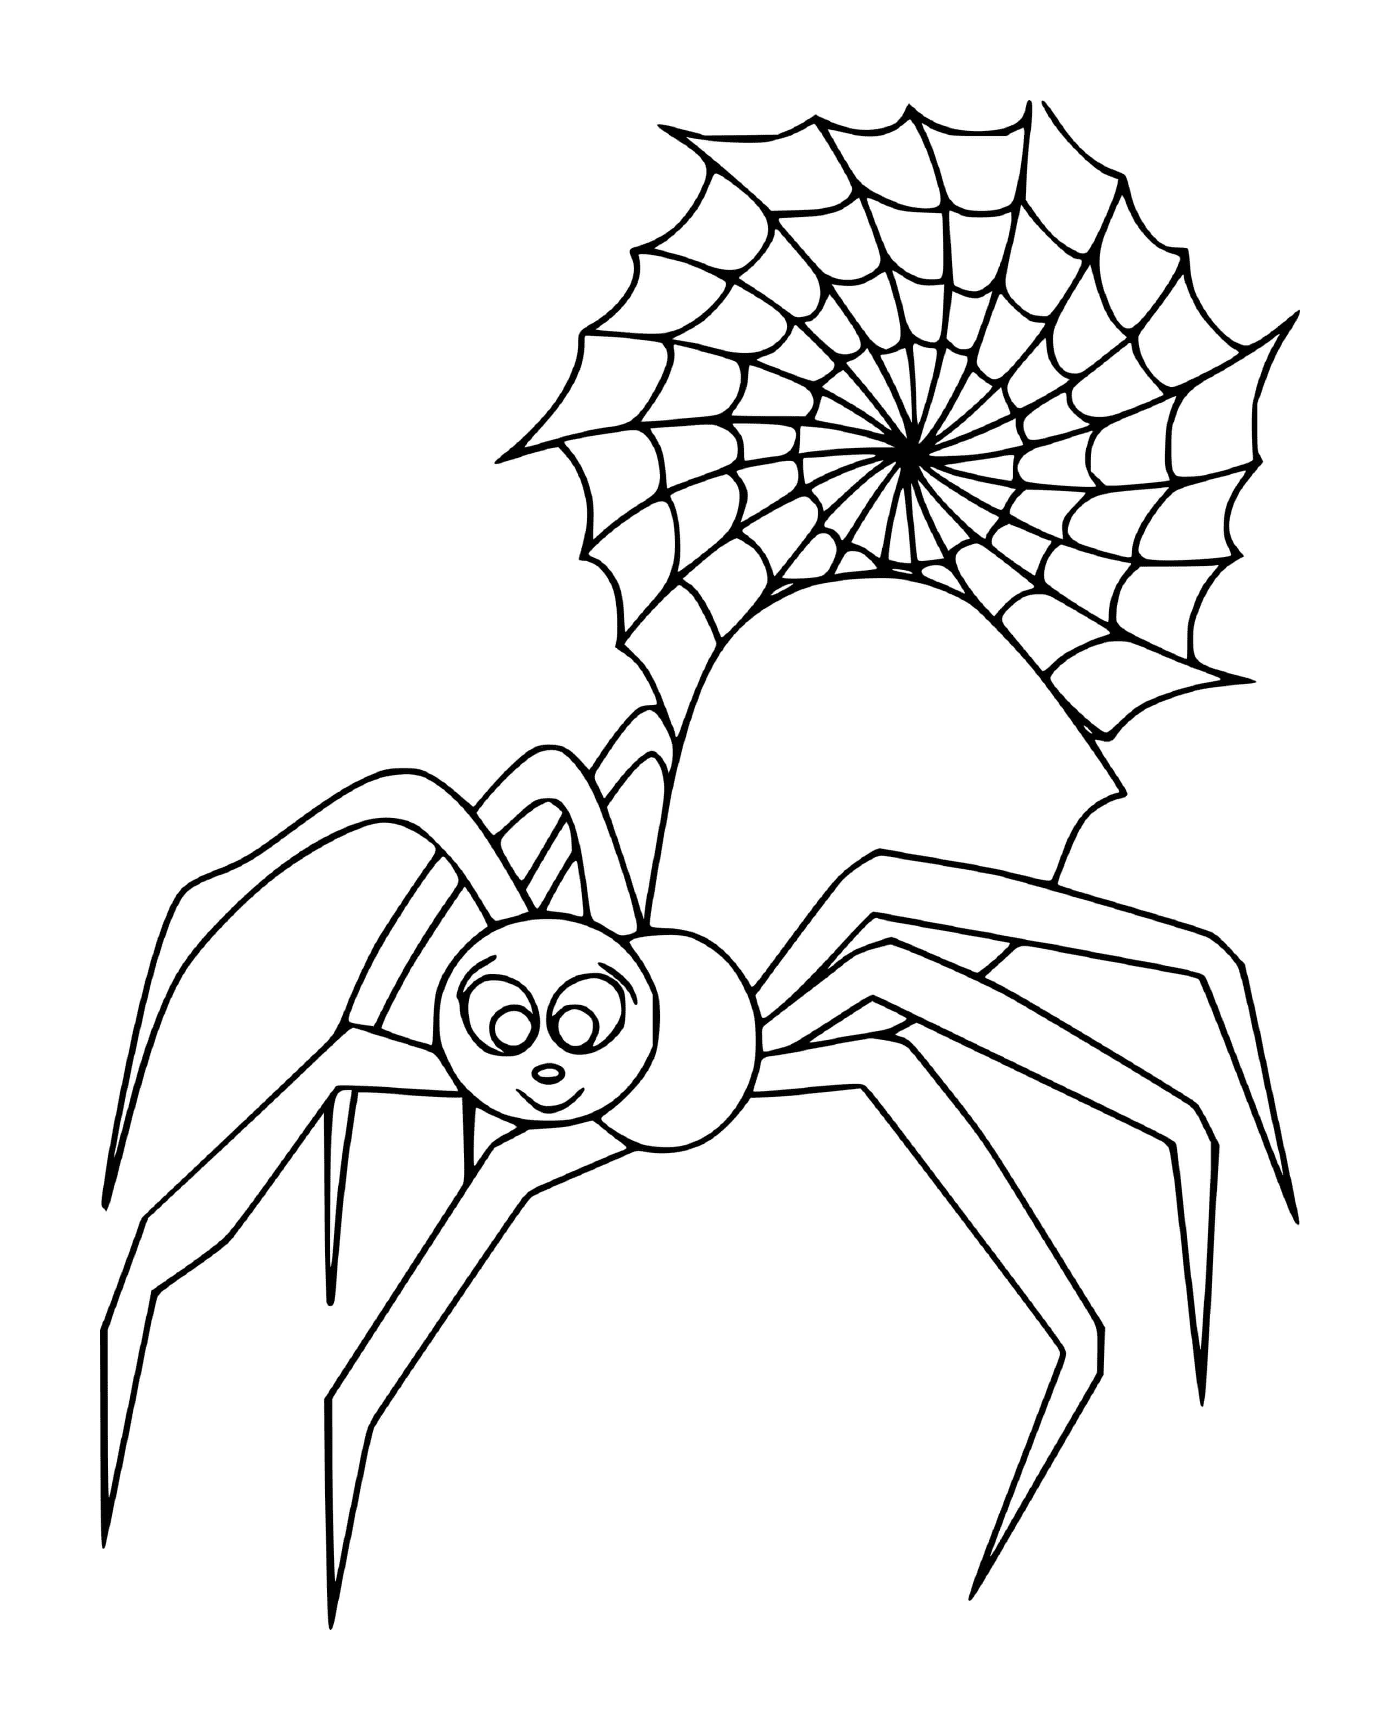  A giant, cute spider 